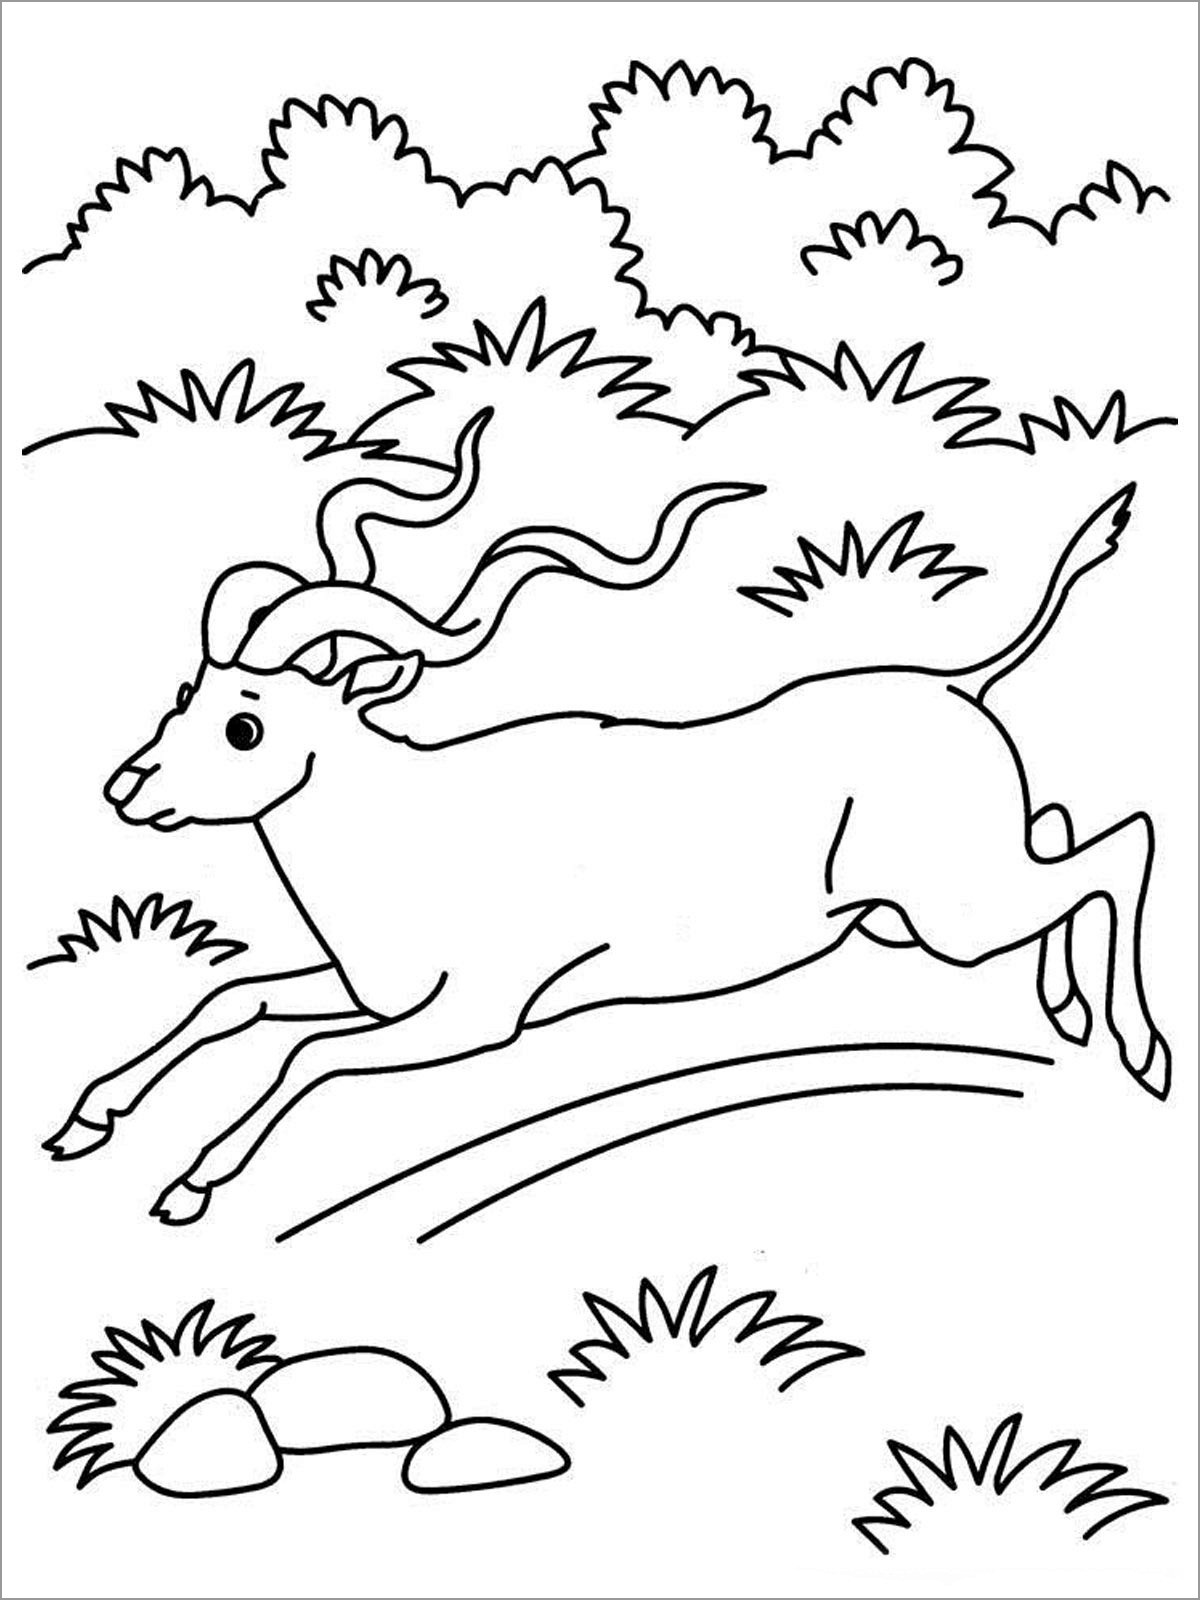 Running Antelope Coloring Pages   ColoringBay